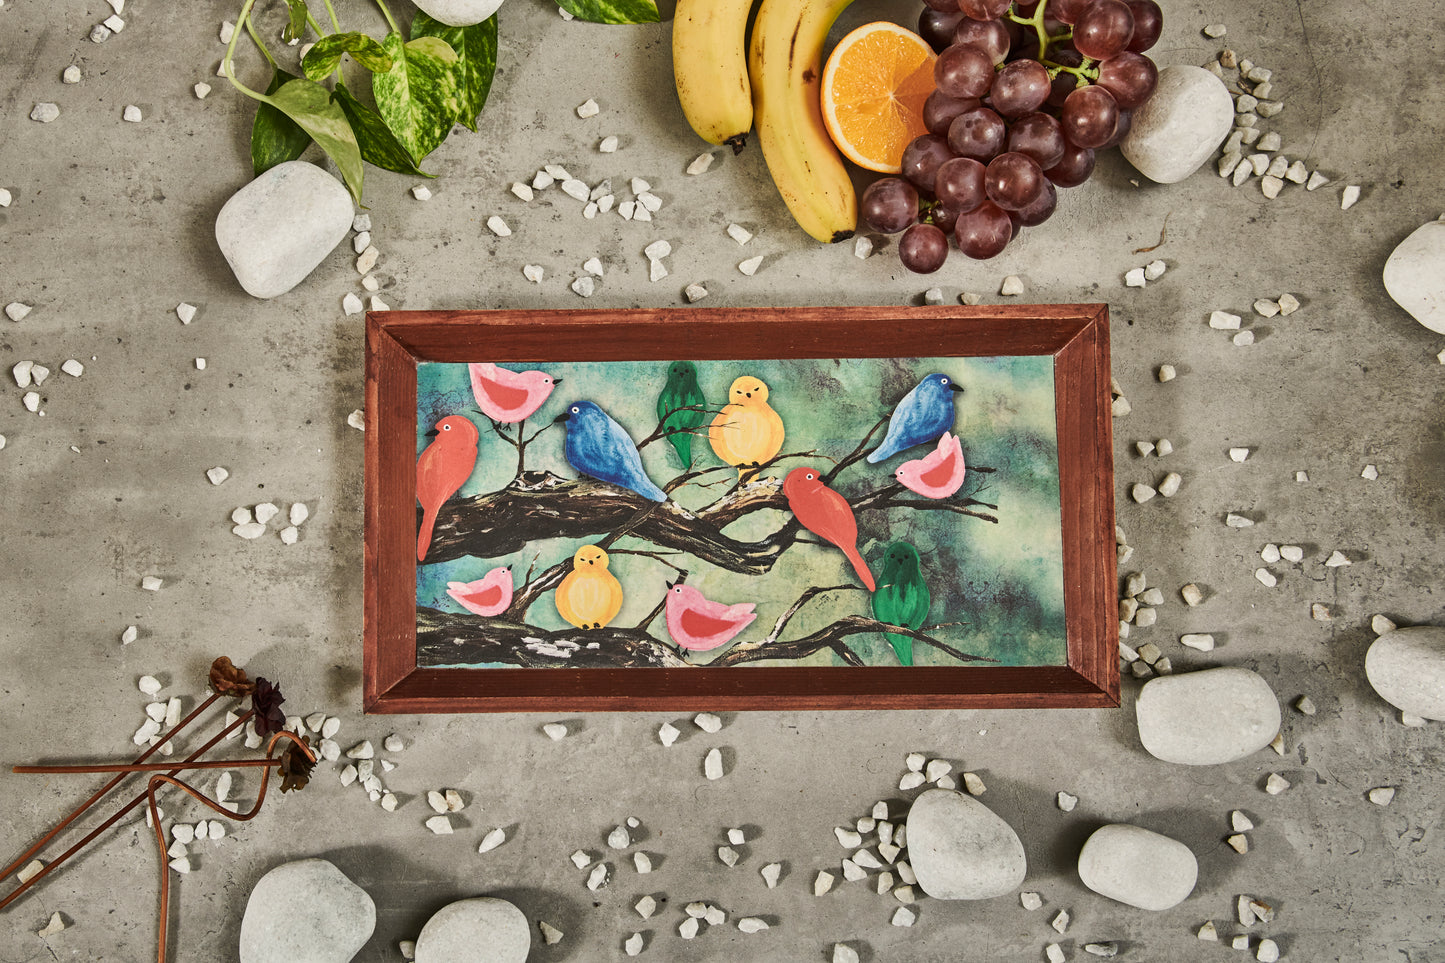 A Tiny Mistake Birds on a Branch Rectangle Wooden Serving Tray, 35 x 20 x 2 cm